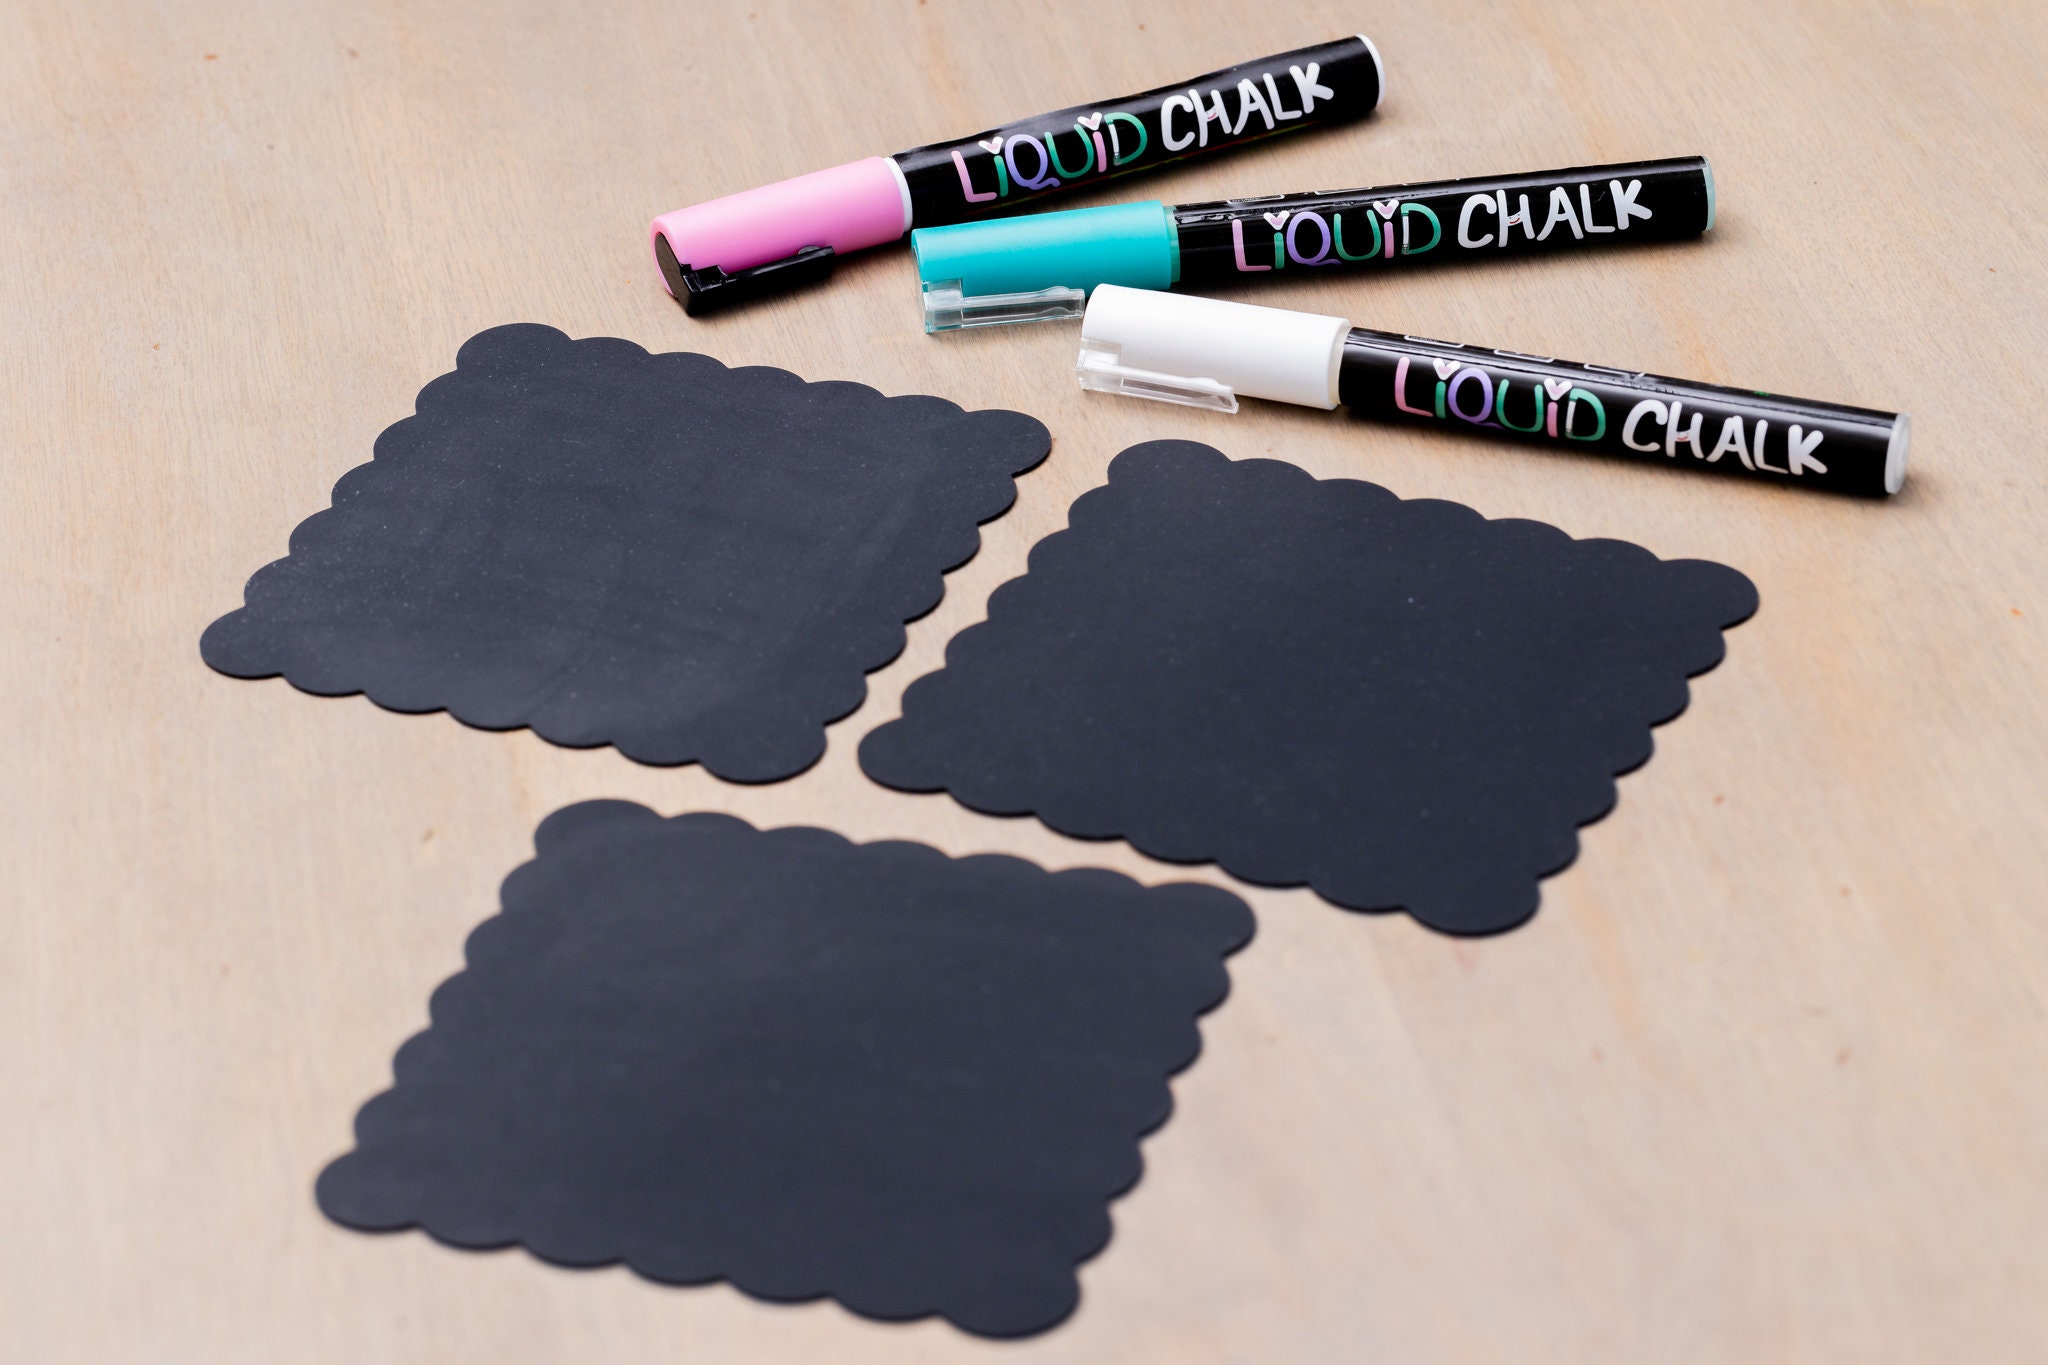 Travel Revealer Chalkboard Contact Paper Self Adhesive Dry Erase